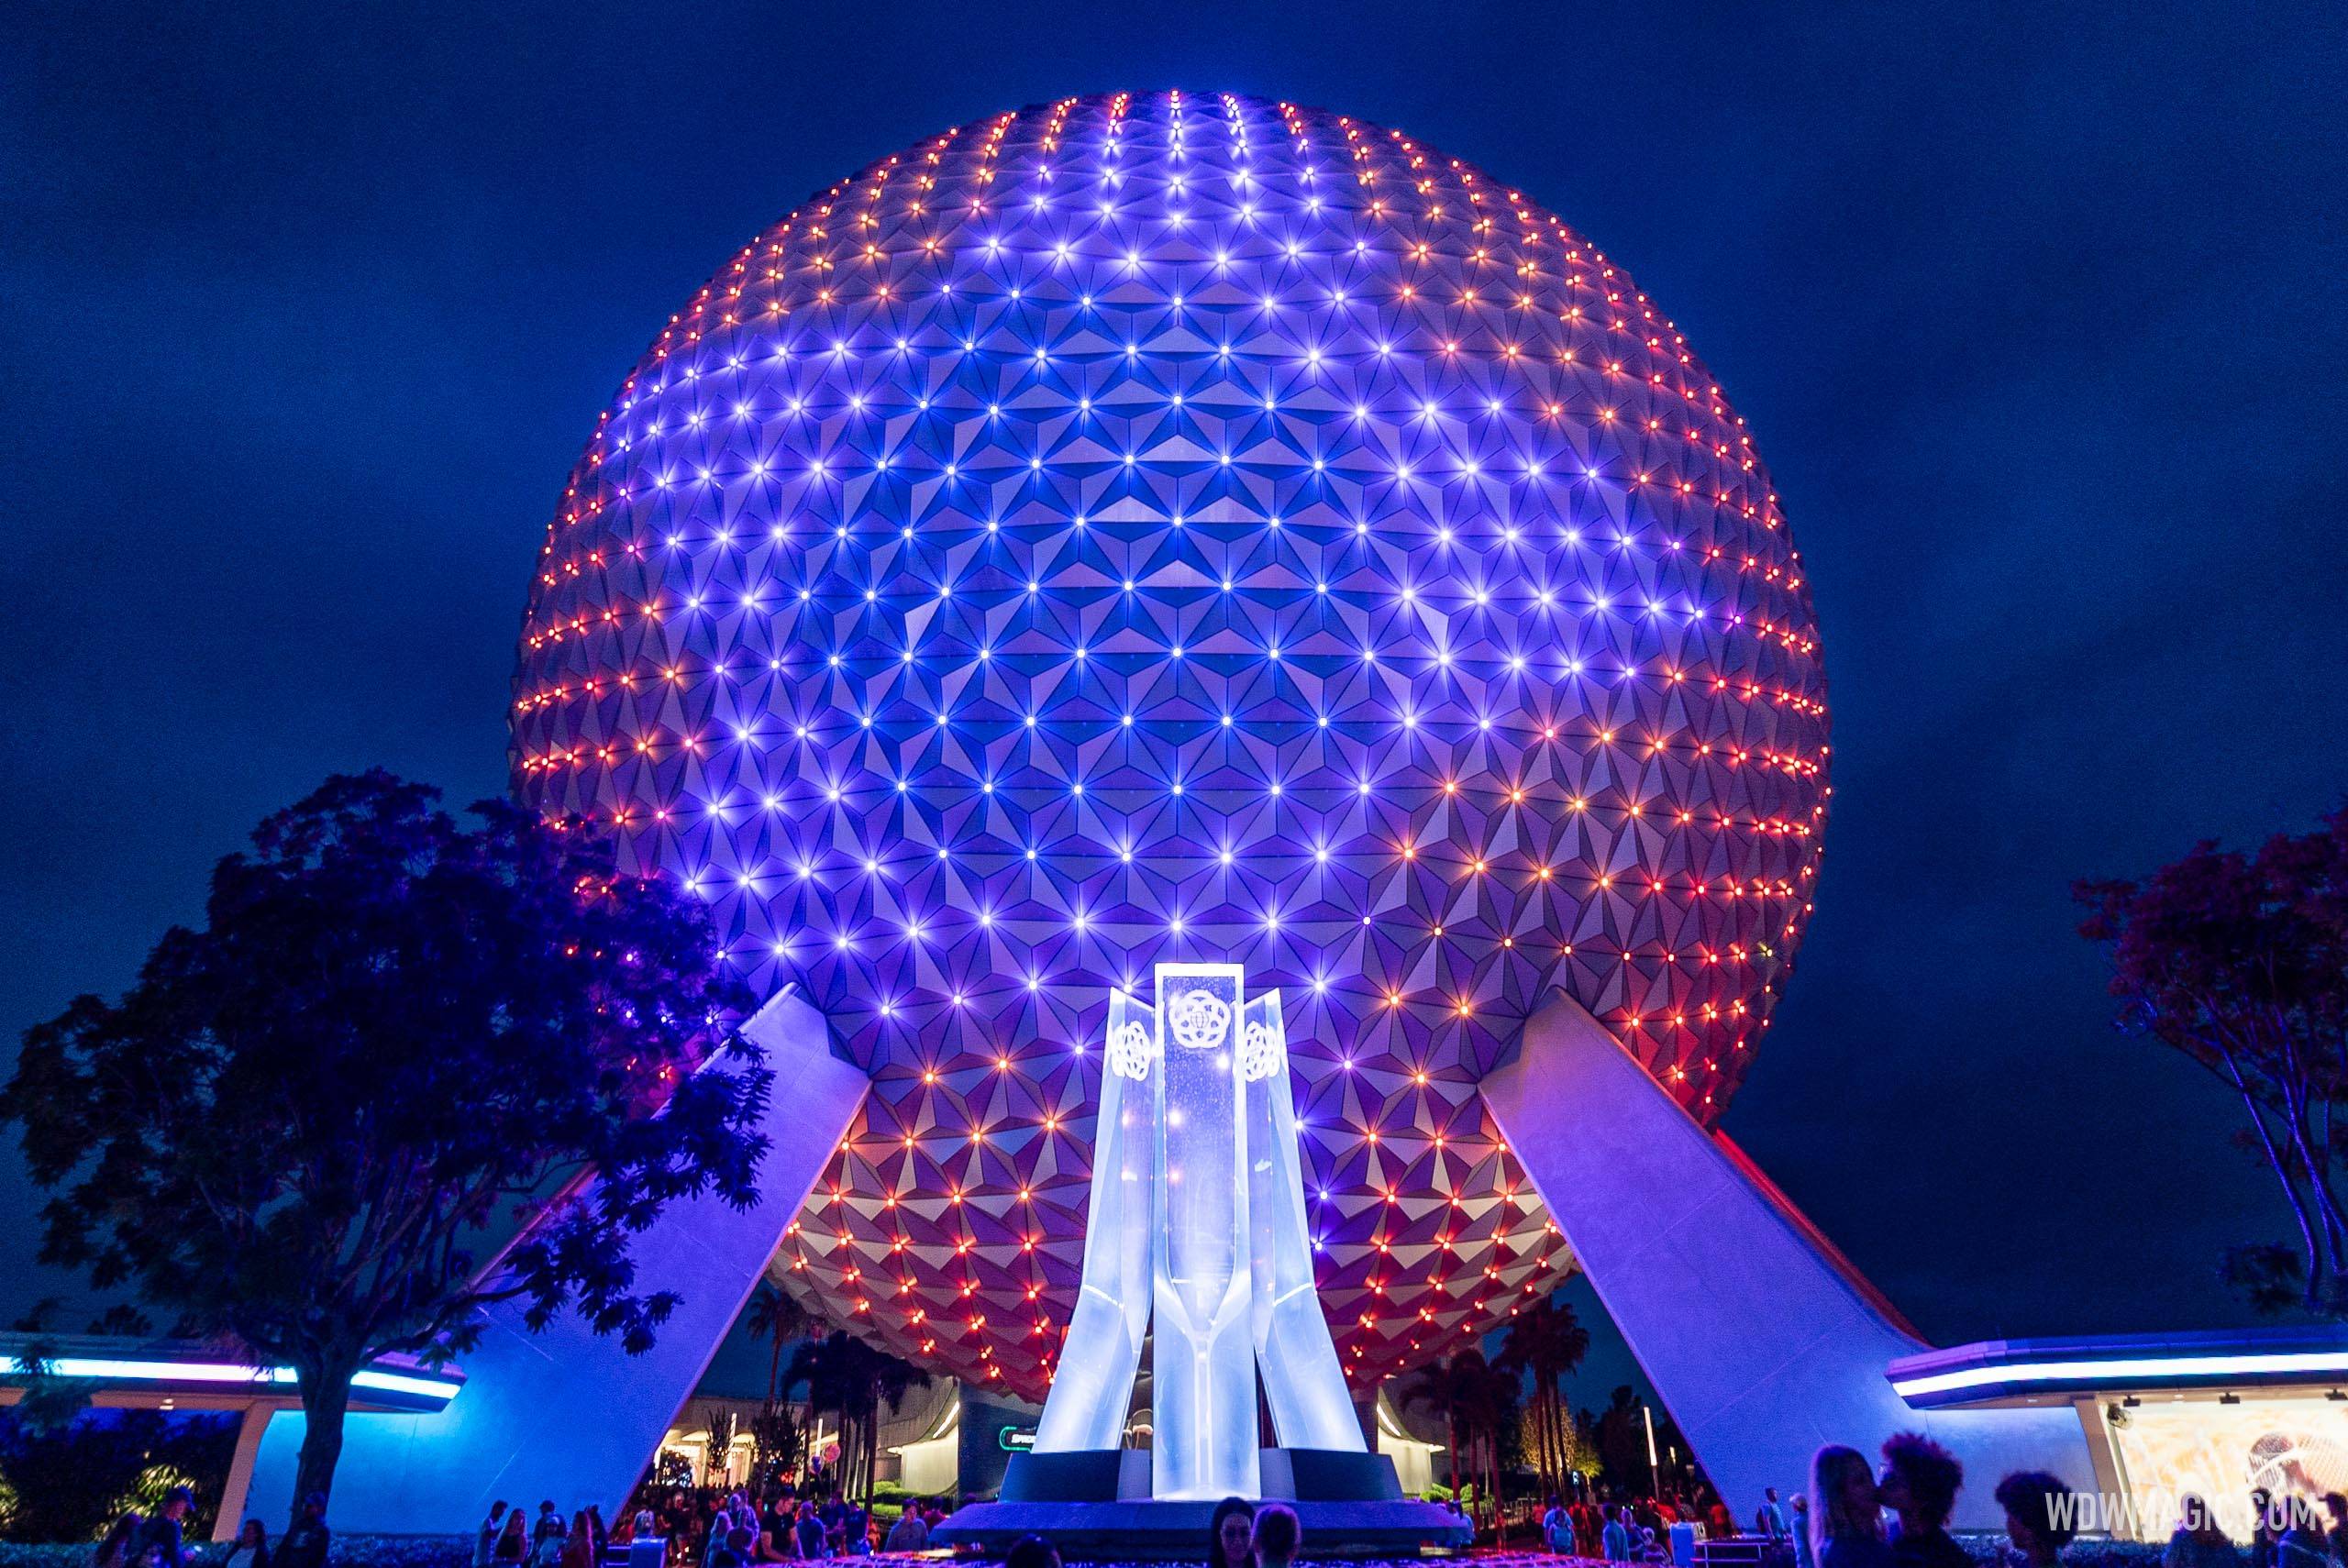 EPCOT's Spaceship Earth shines in new colors to celebrate 'Wish' movie opening, featuring 'I'm a Star' song